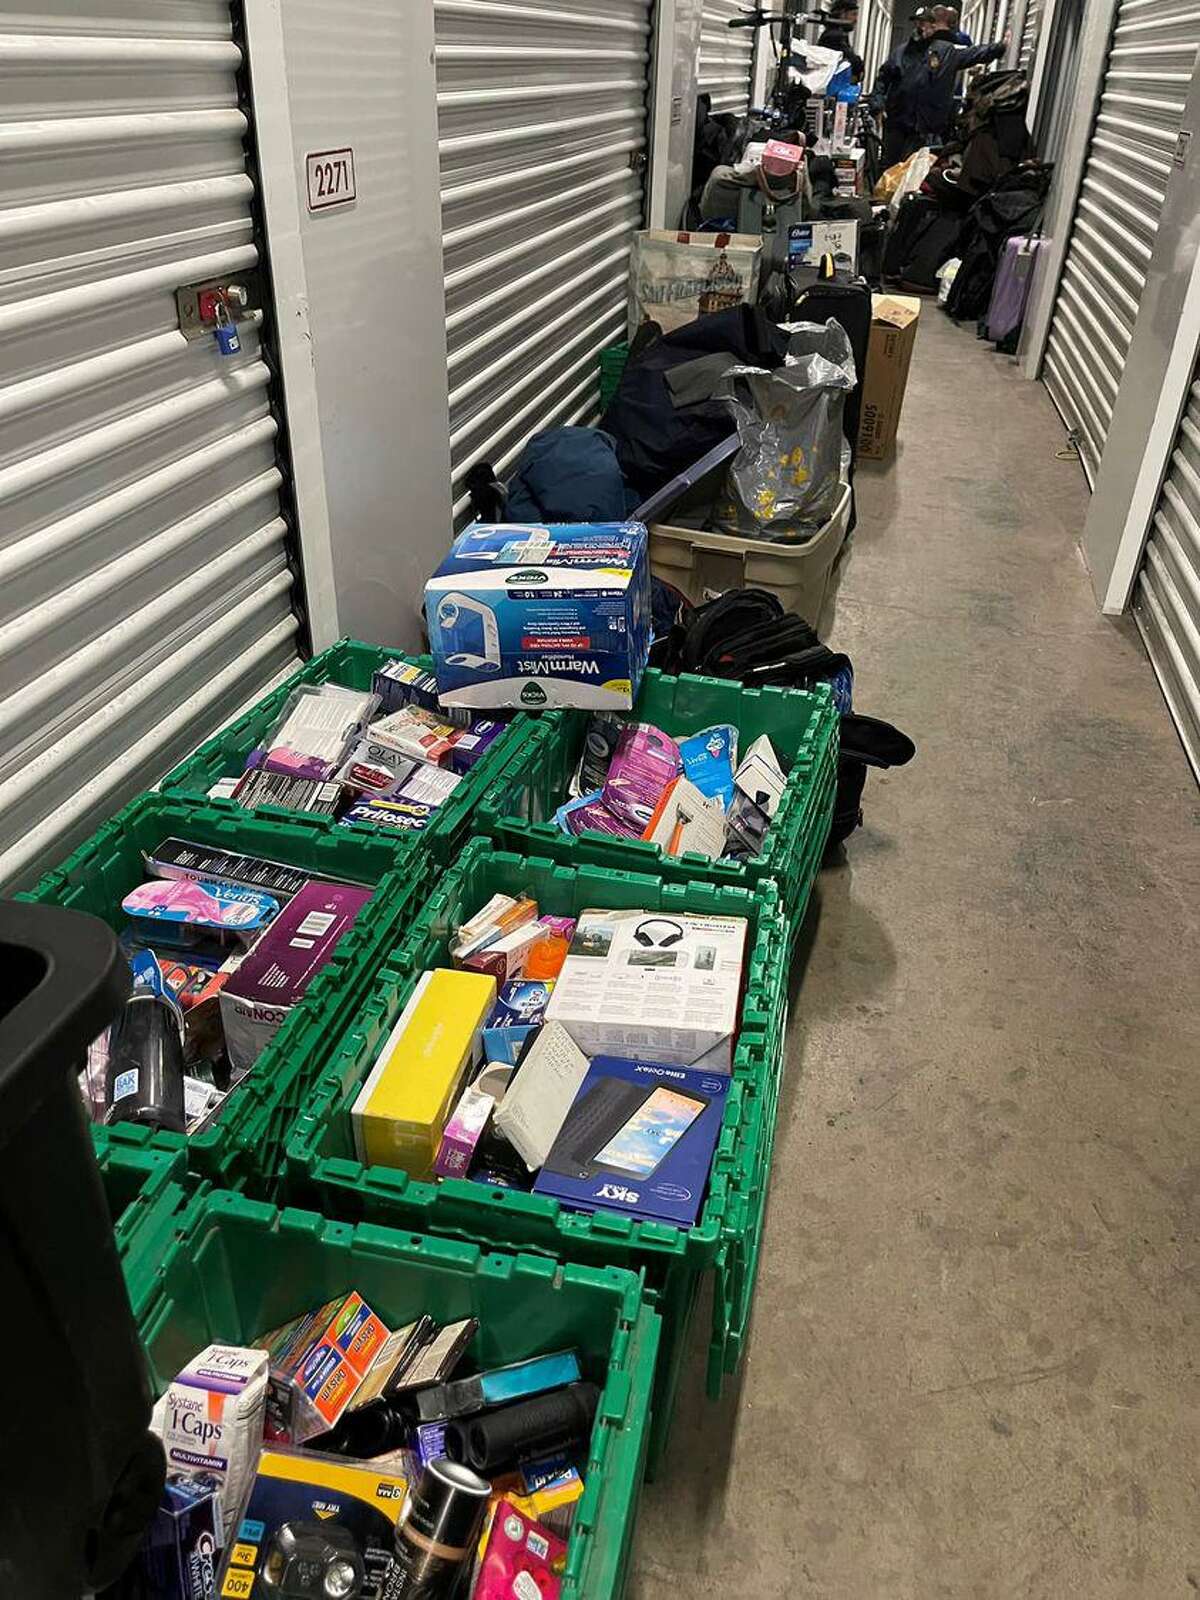 Searches of storage units in Vallejo and San Francisco led to the recovery of more than $200,000 in stolen retail goods.